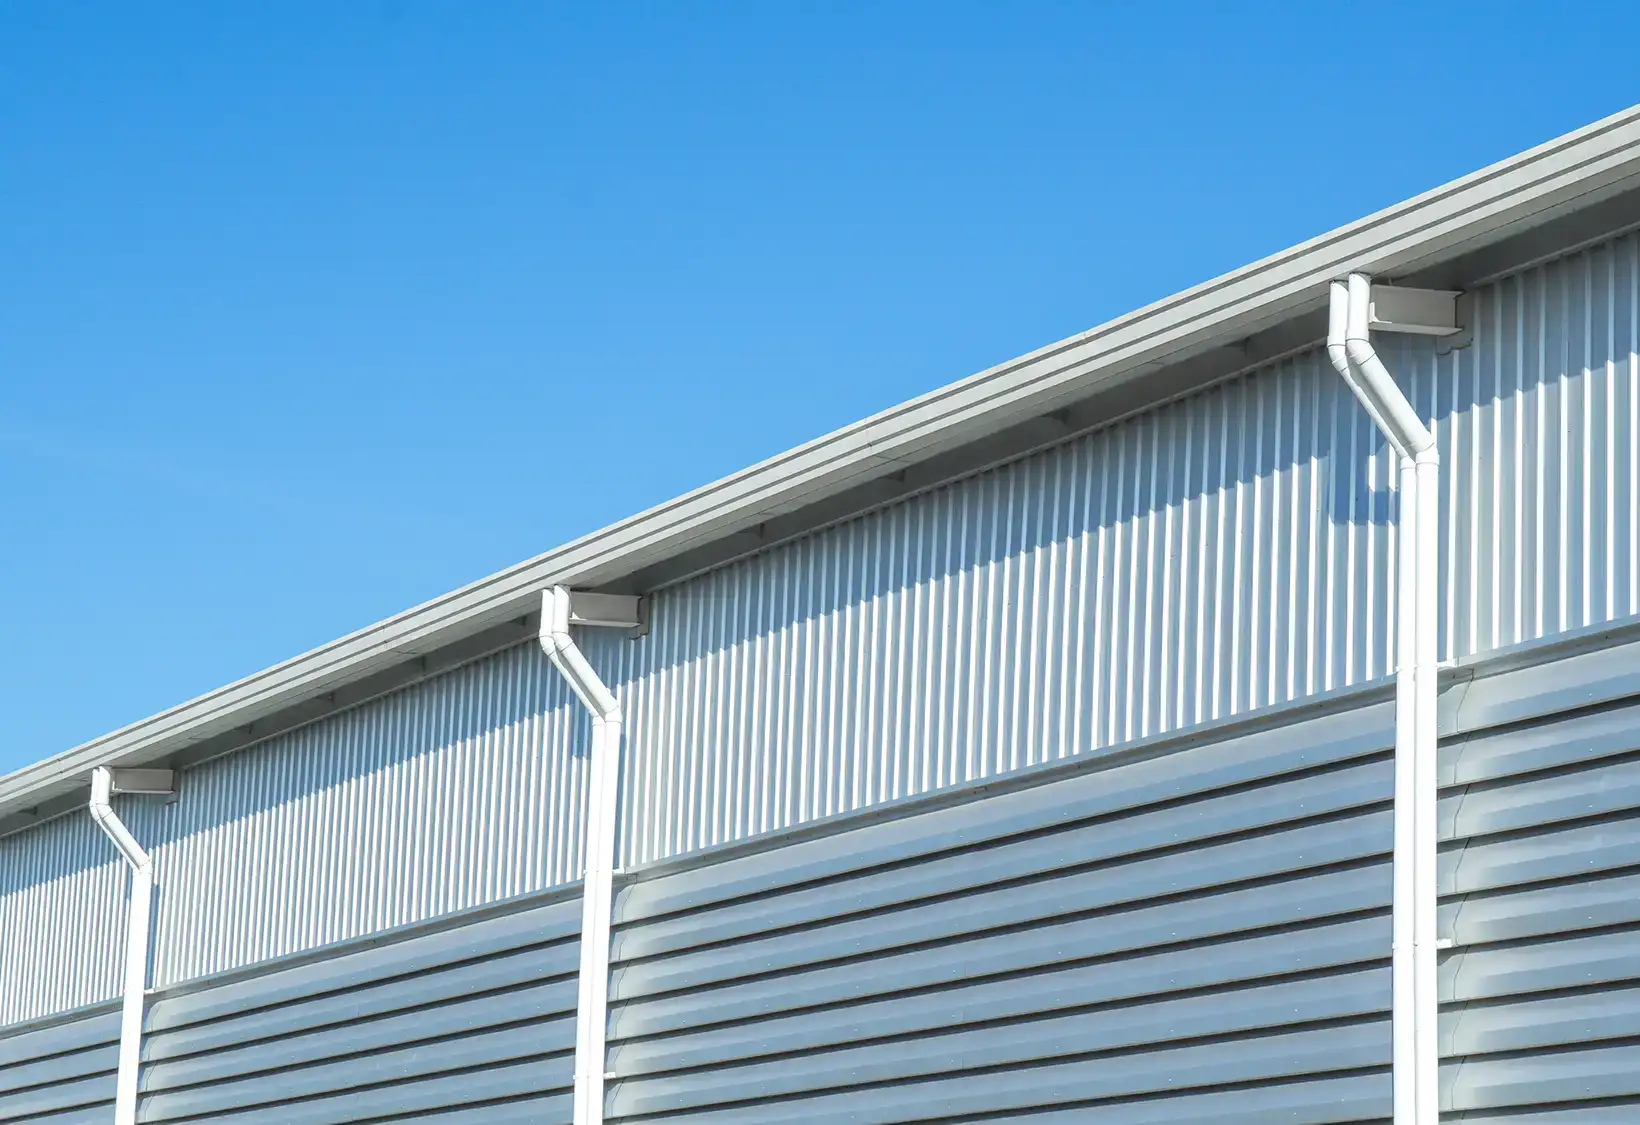 Commercial gutter system for large warehouse - Marion County, IL